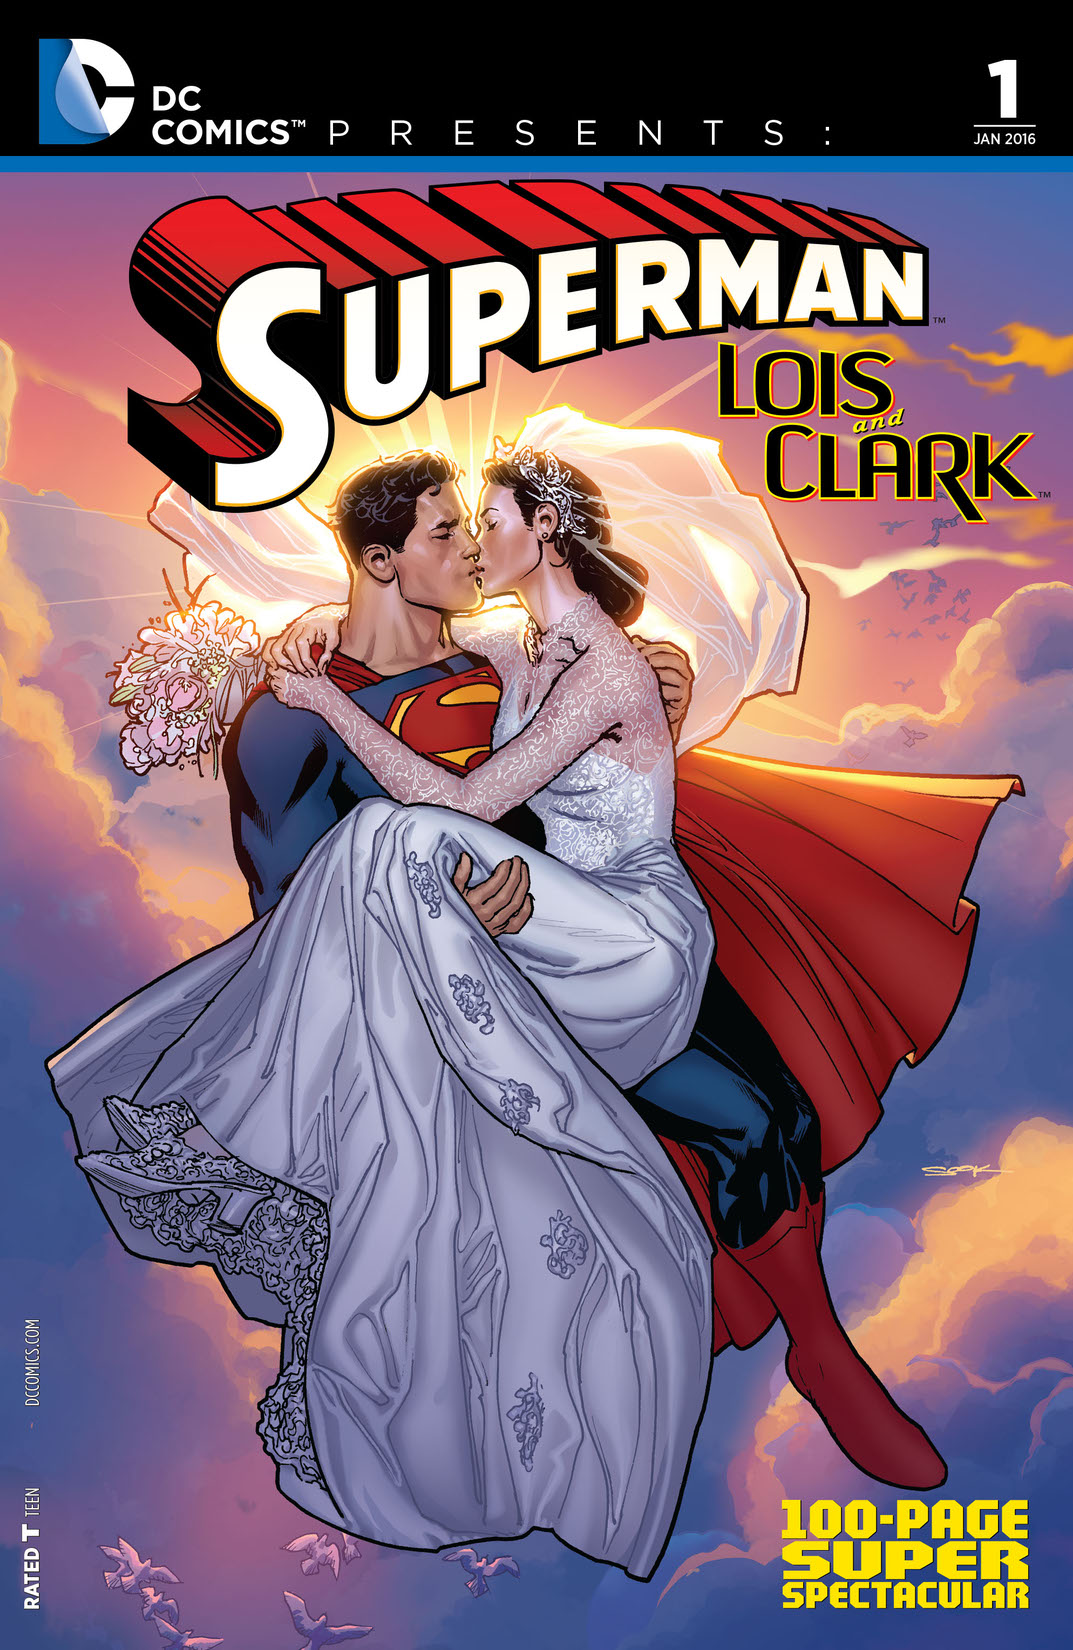 DC Comics Presents: Superman: Lois and Clark 100-Page Super Spectacular (2015-) #1 preview images